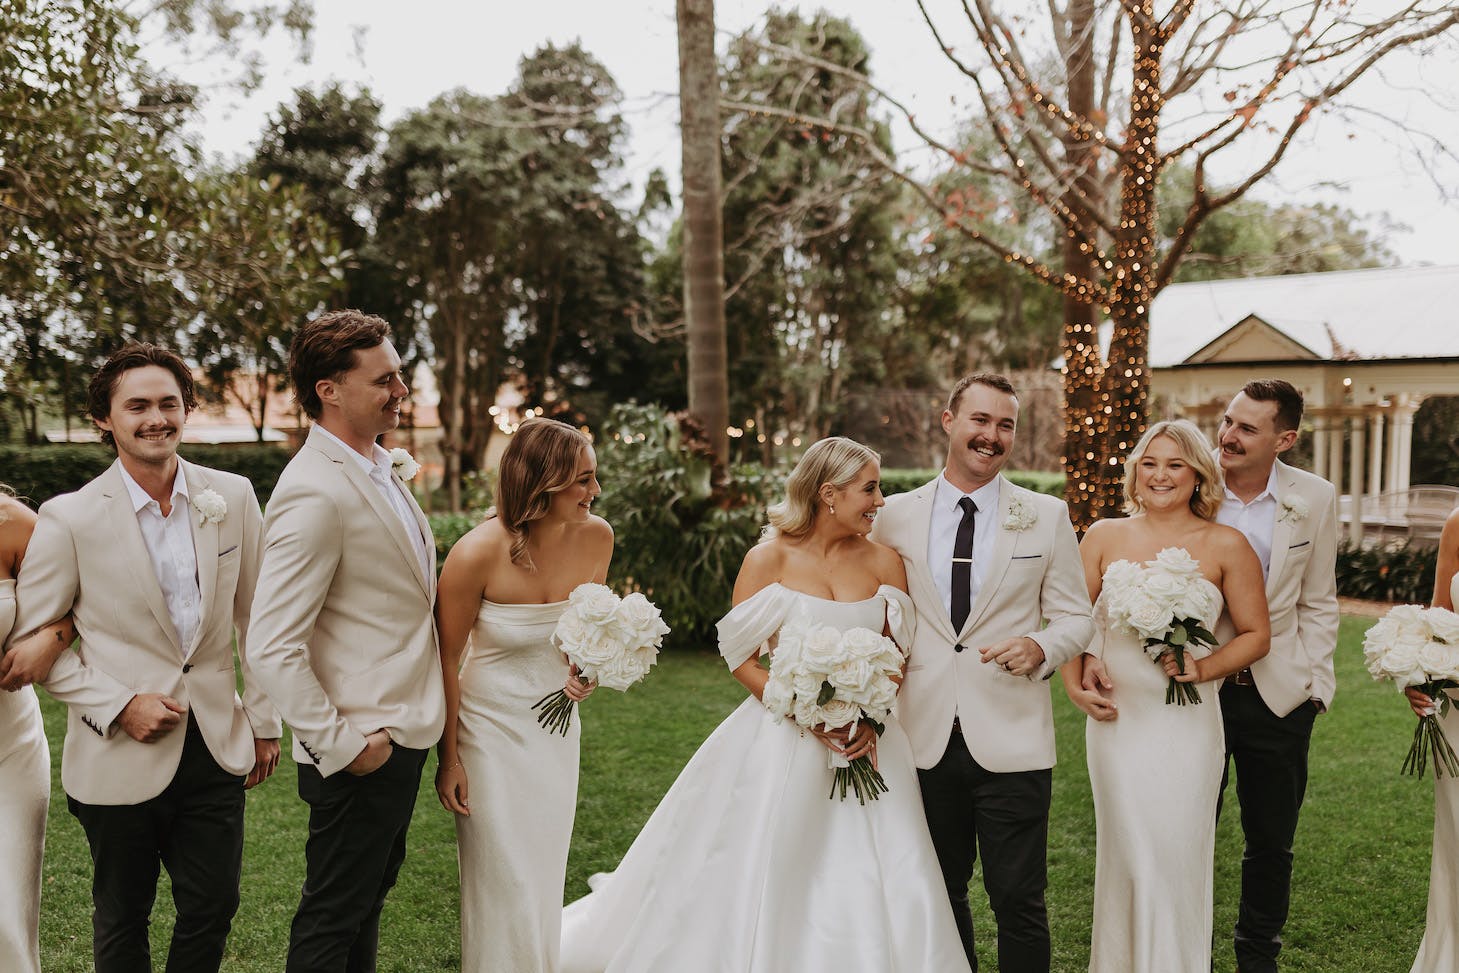 Seven people stand outdoors in formal attire next to one another, smiling and laughing. The group includes three men in light-colored suits with boutonnieres and four women in white dresses holding bouquets. They are in a garden setting with trees and a decorated tree trunk.